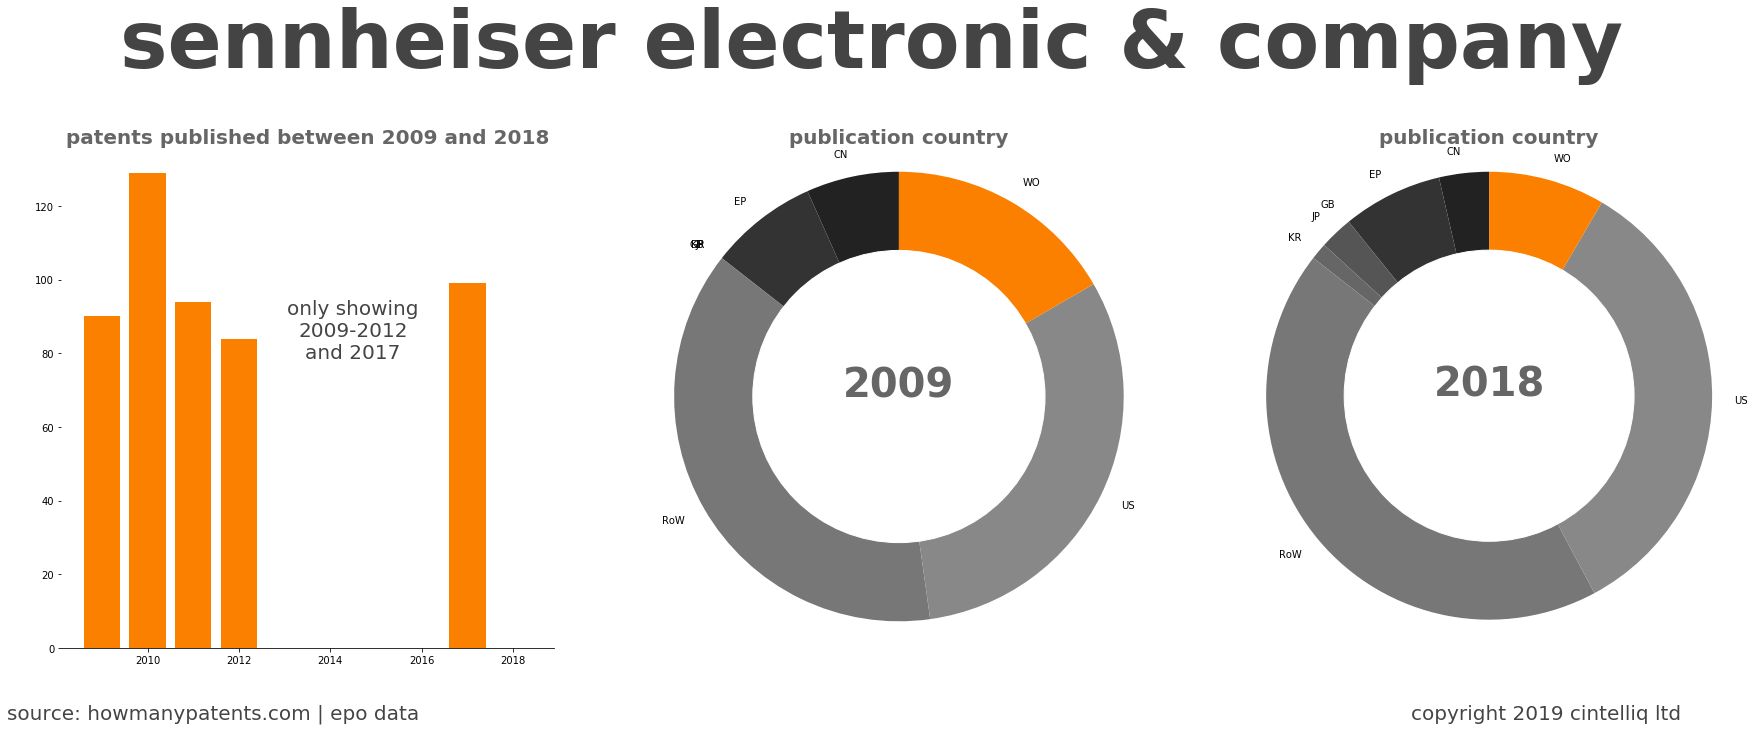 summary of patents for Sennheiser Electronic & Company